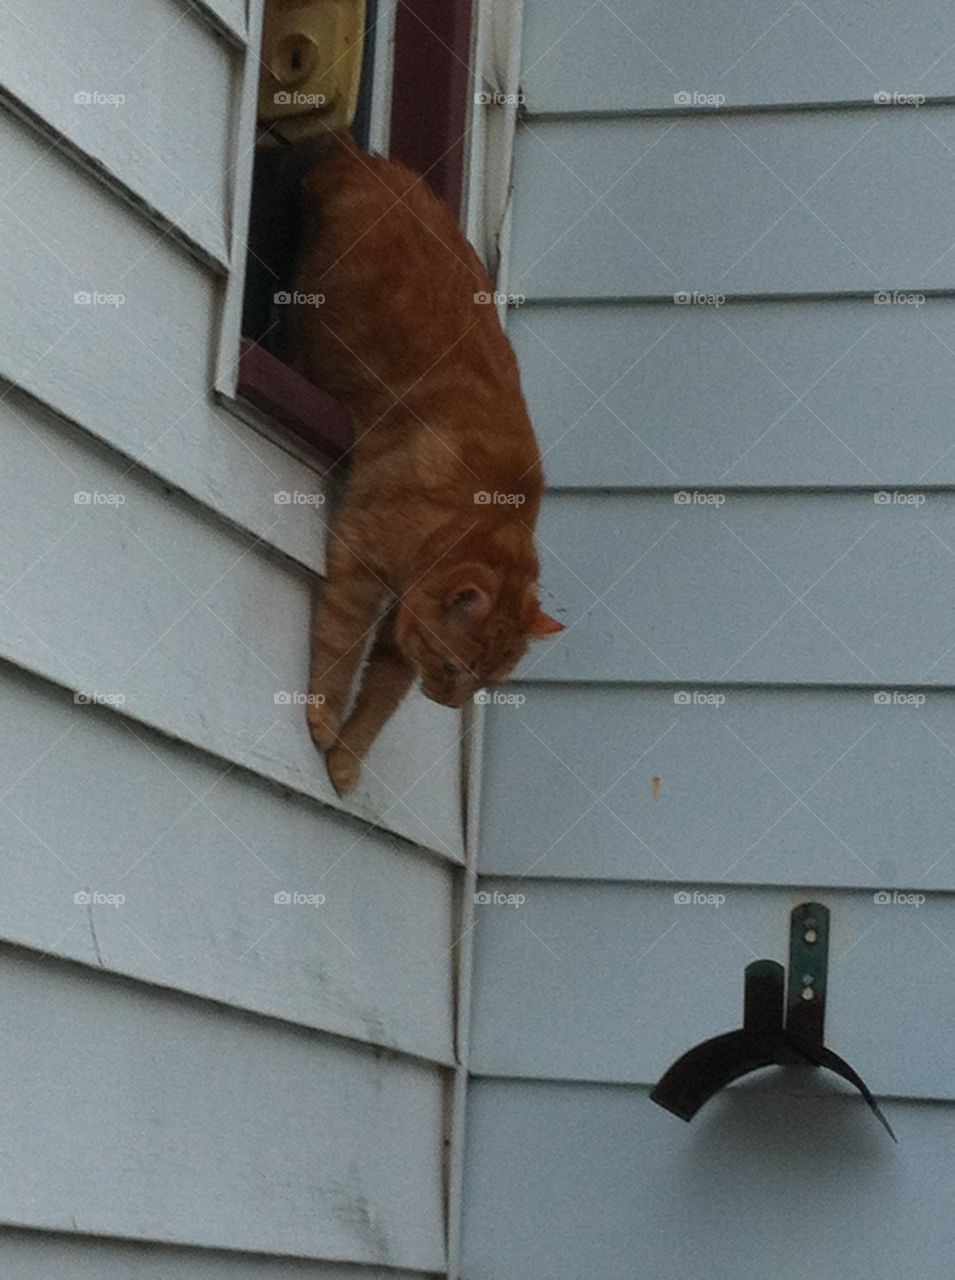 The Great Escape. Cat escapes out the window